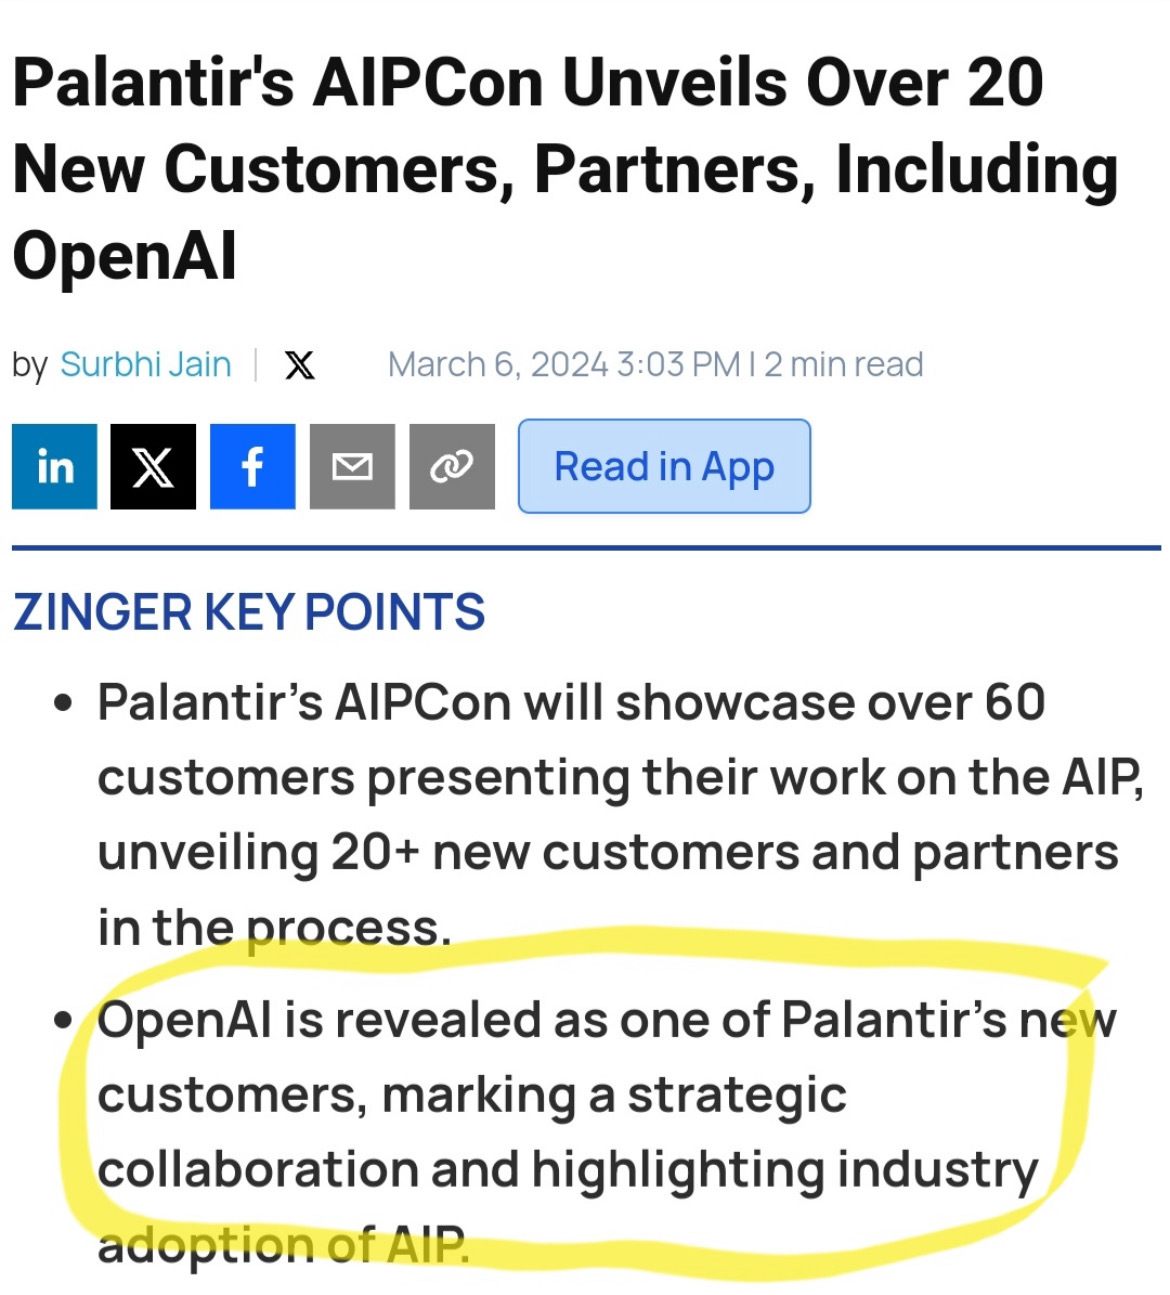 $Palantir (PLTR.US)$ This is a long hold and hopefully a millionaire maker. They’re finally getting noticed and it’s not by the little guys.